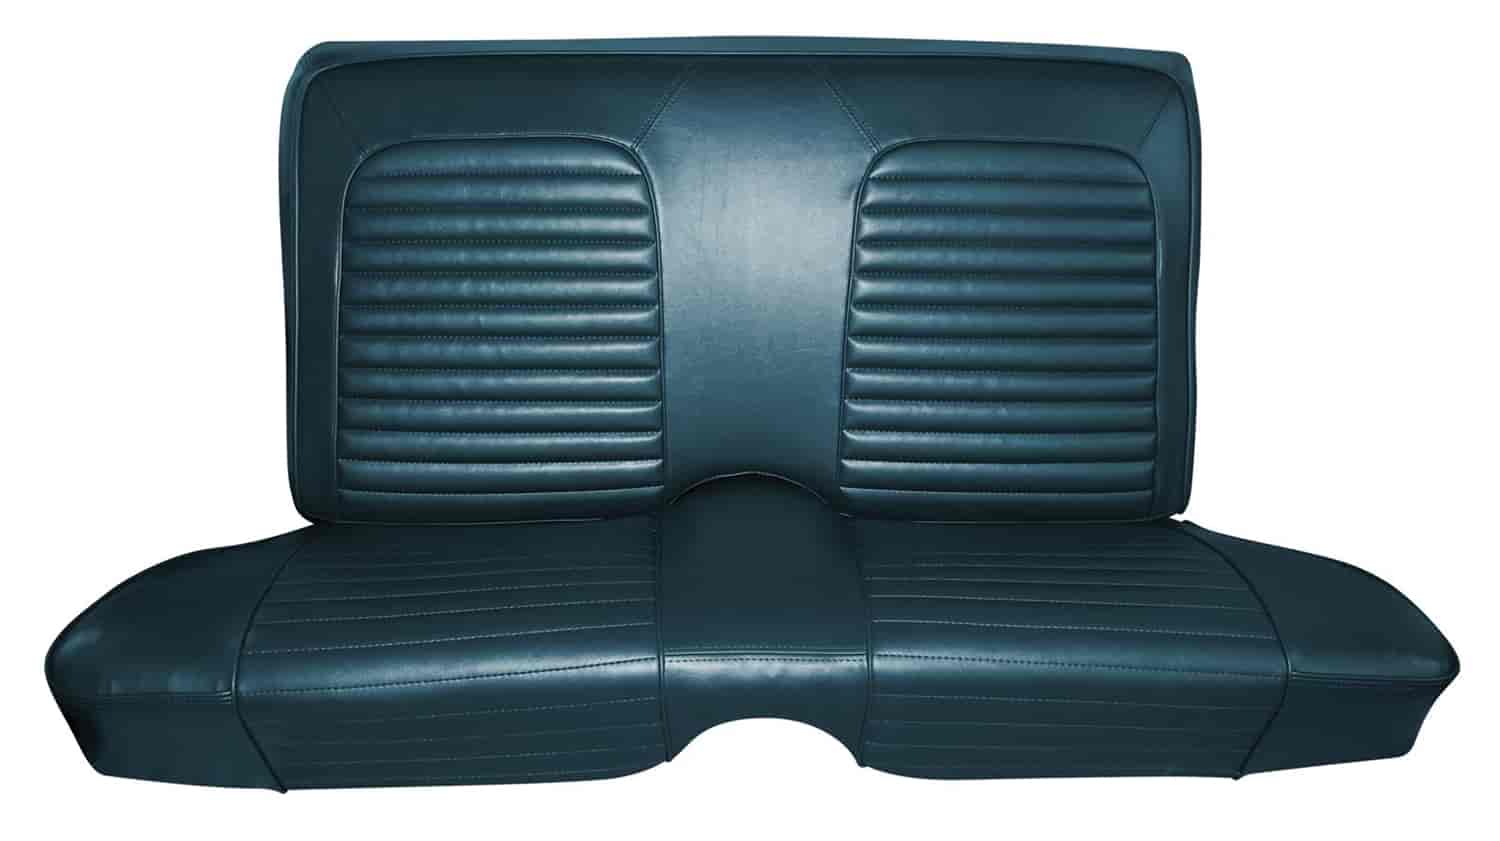 1963 Ford Falcon Futura Convertible Interior with Front Bench Seat Front and Rear Upholstery Set